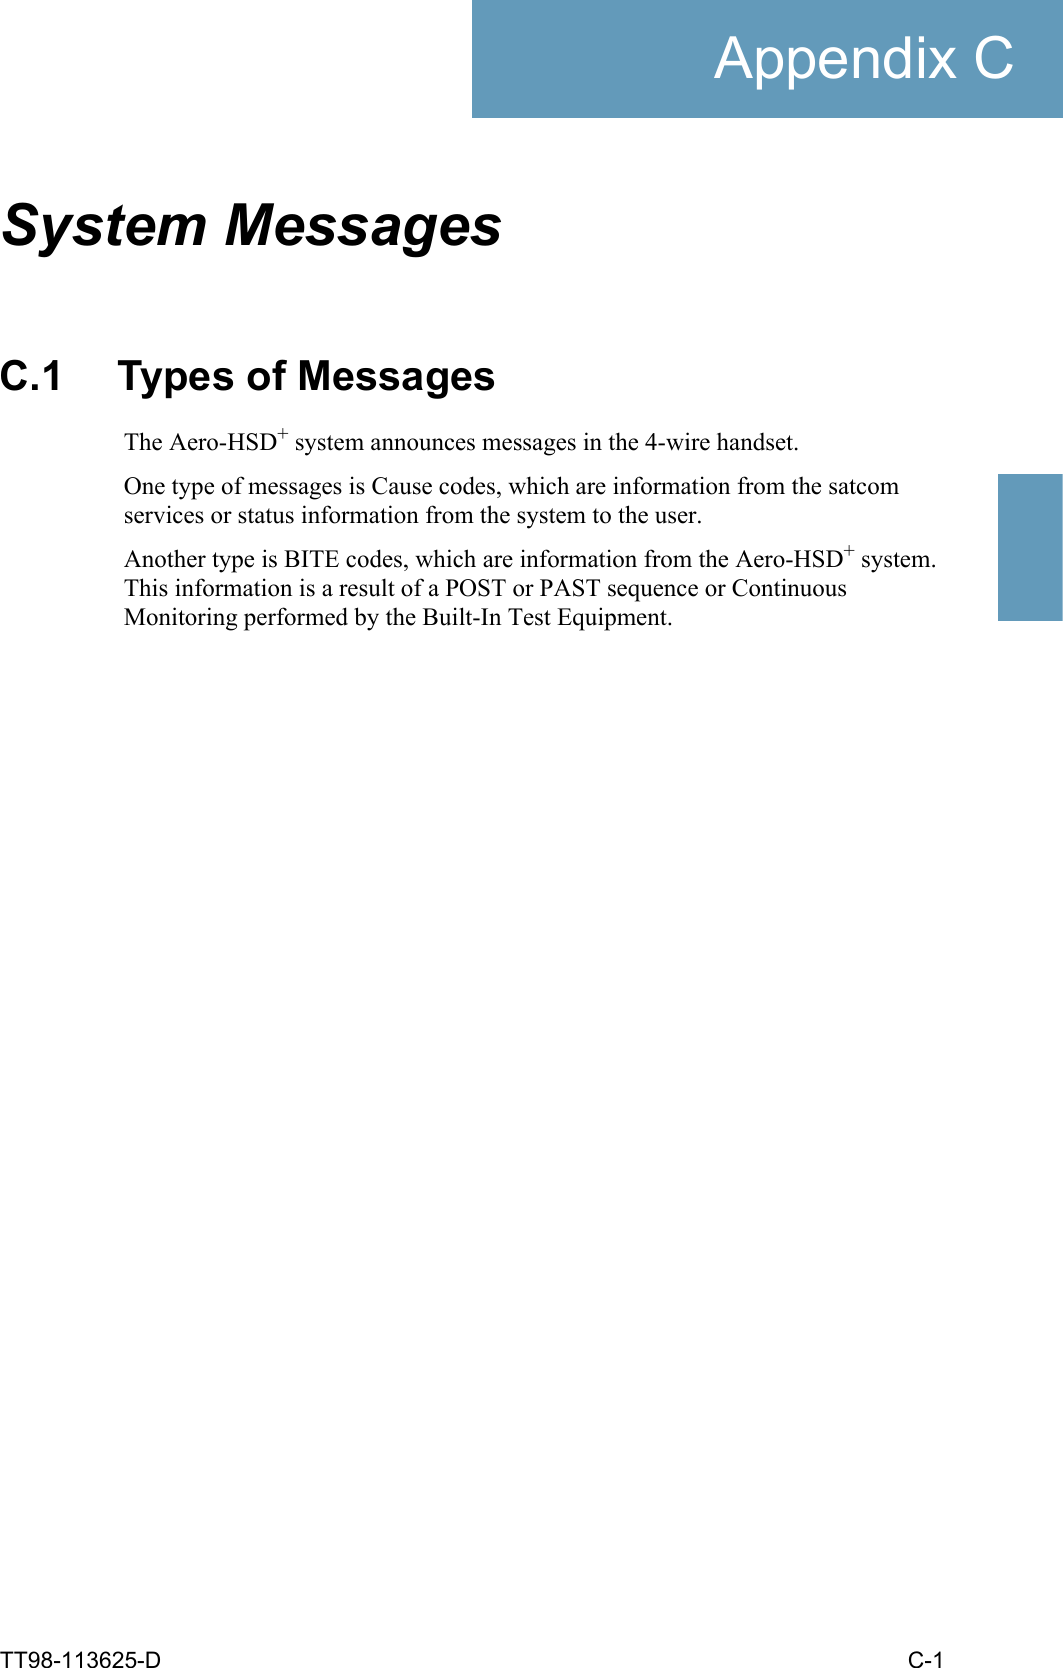 TT98-113625-D C-1Appendix CCCCCSystem Messages CC.1 Types of MessagesThe Aero-HSD+ system announces messages in the 4-wire handset. One type of messages is Cause codes, which are information from the satcom services or status information from the system to the user. Another type is BITE codes, which are information from the Aero-HSD+ system. This information is a result of a POST or PAST sequence or Continuous Monitoring performed by the Built-In Test Equipment. 